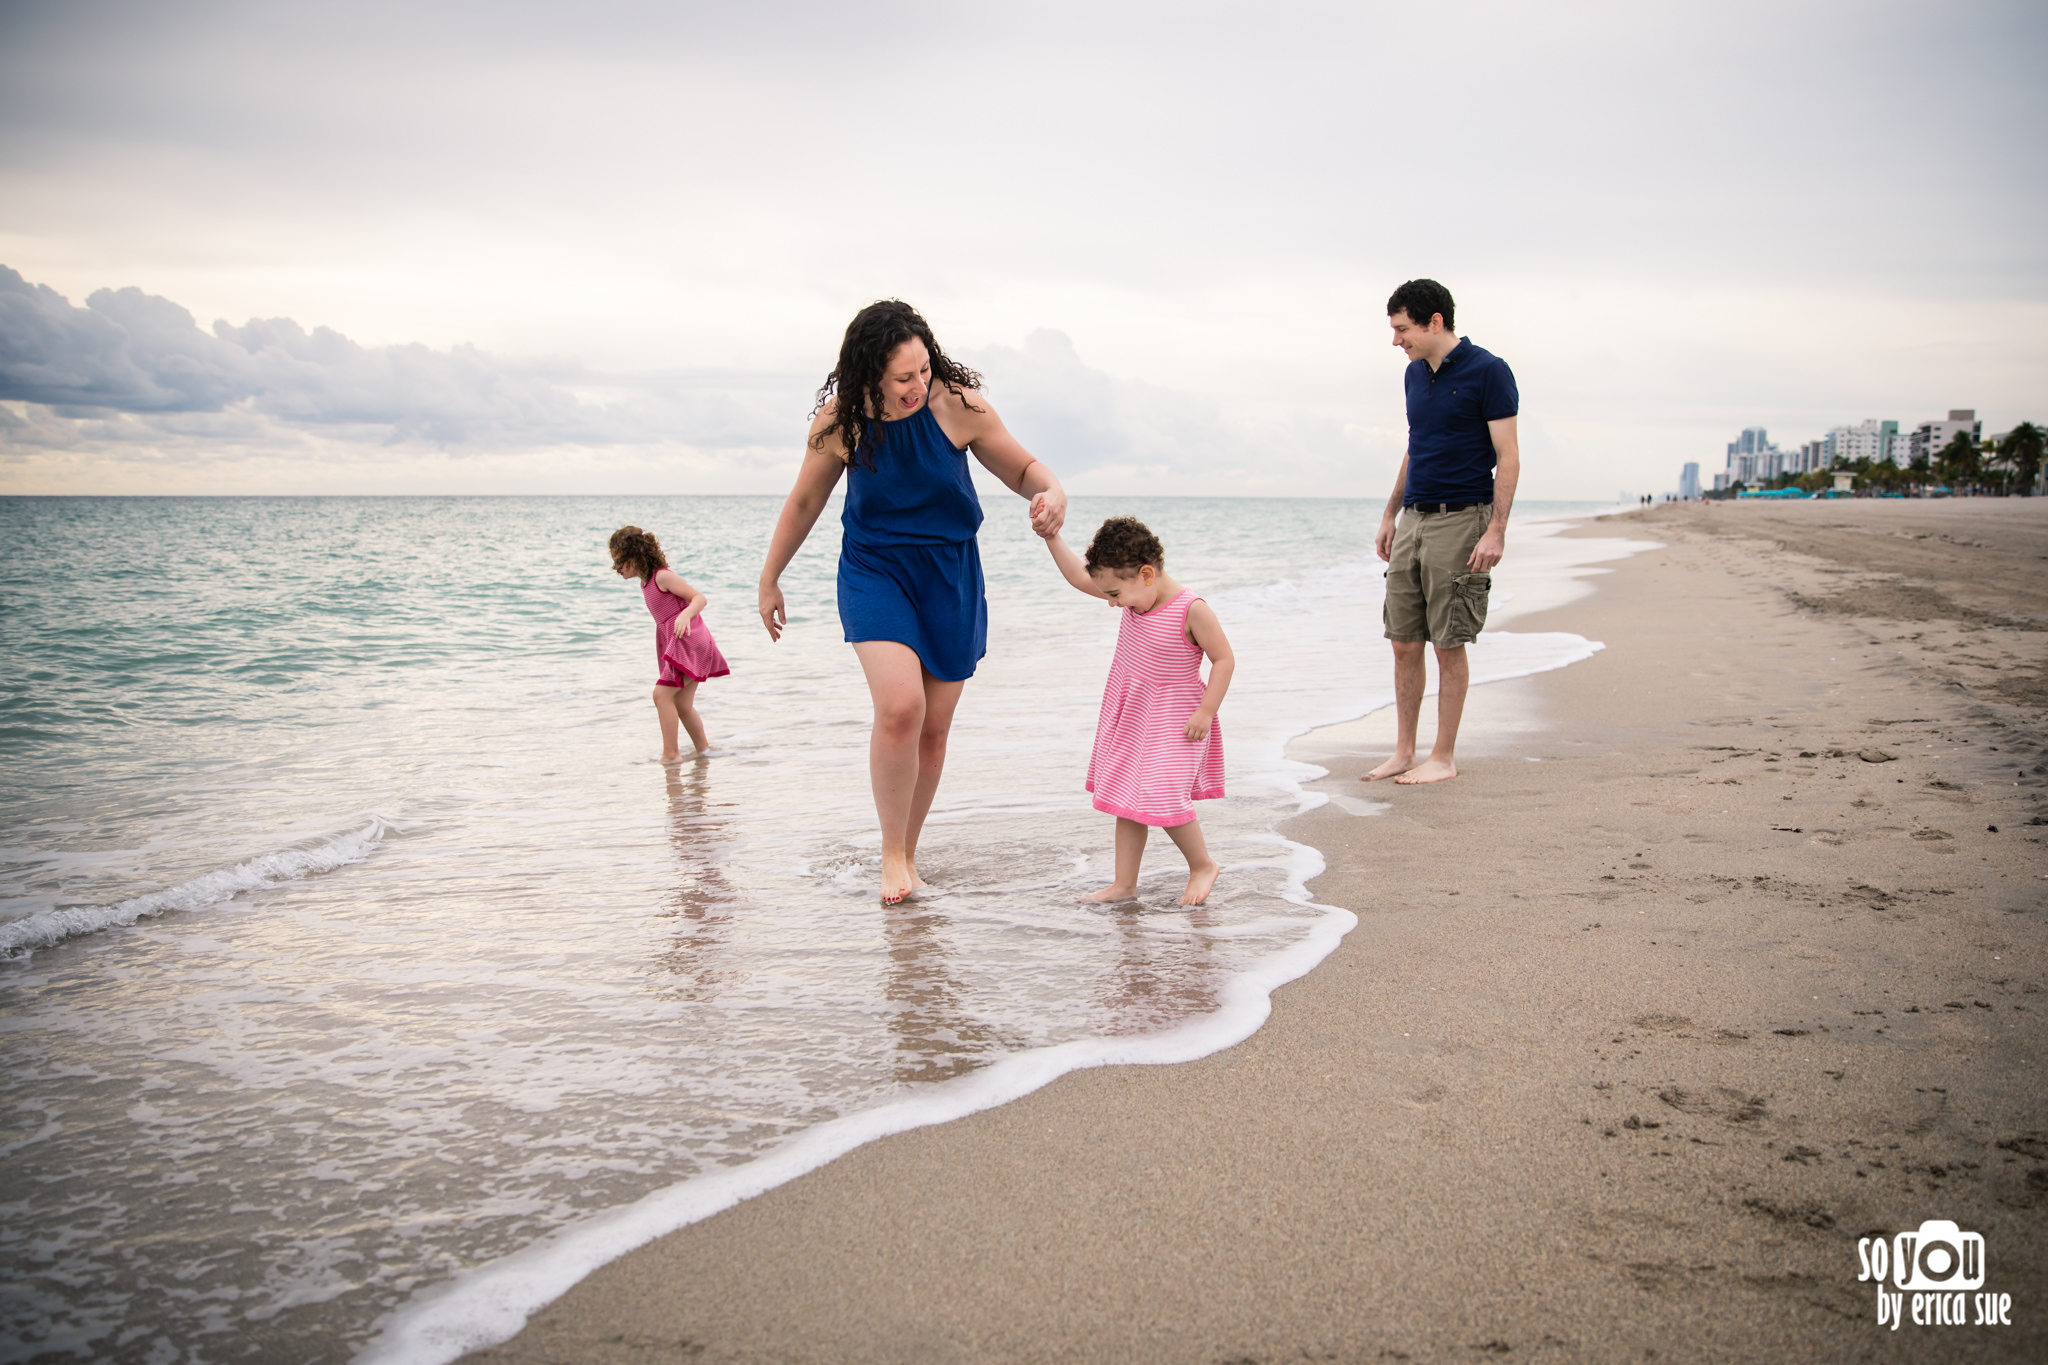 so-you-by-erica-sue-hollywood-beach-lifestyle-family-photographer-session-1137.JPG